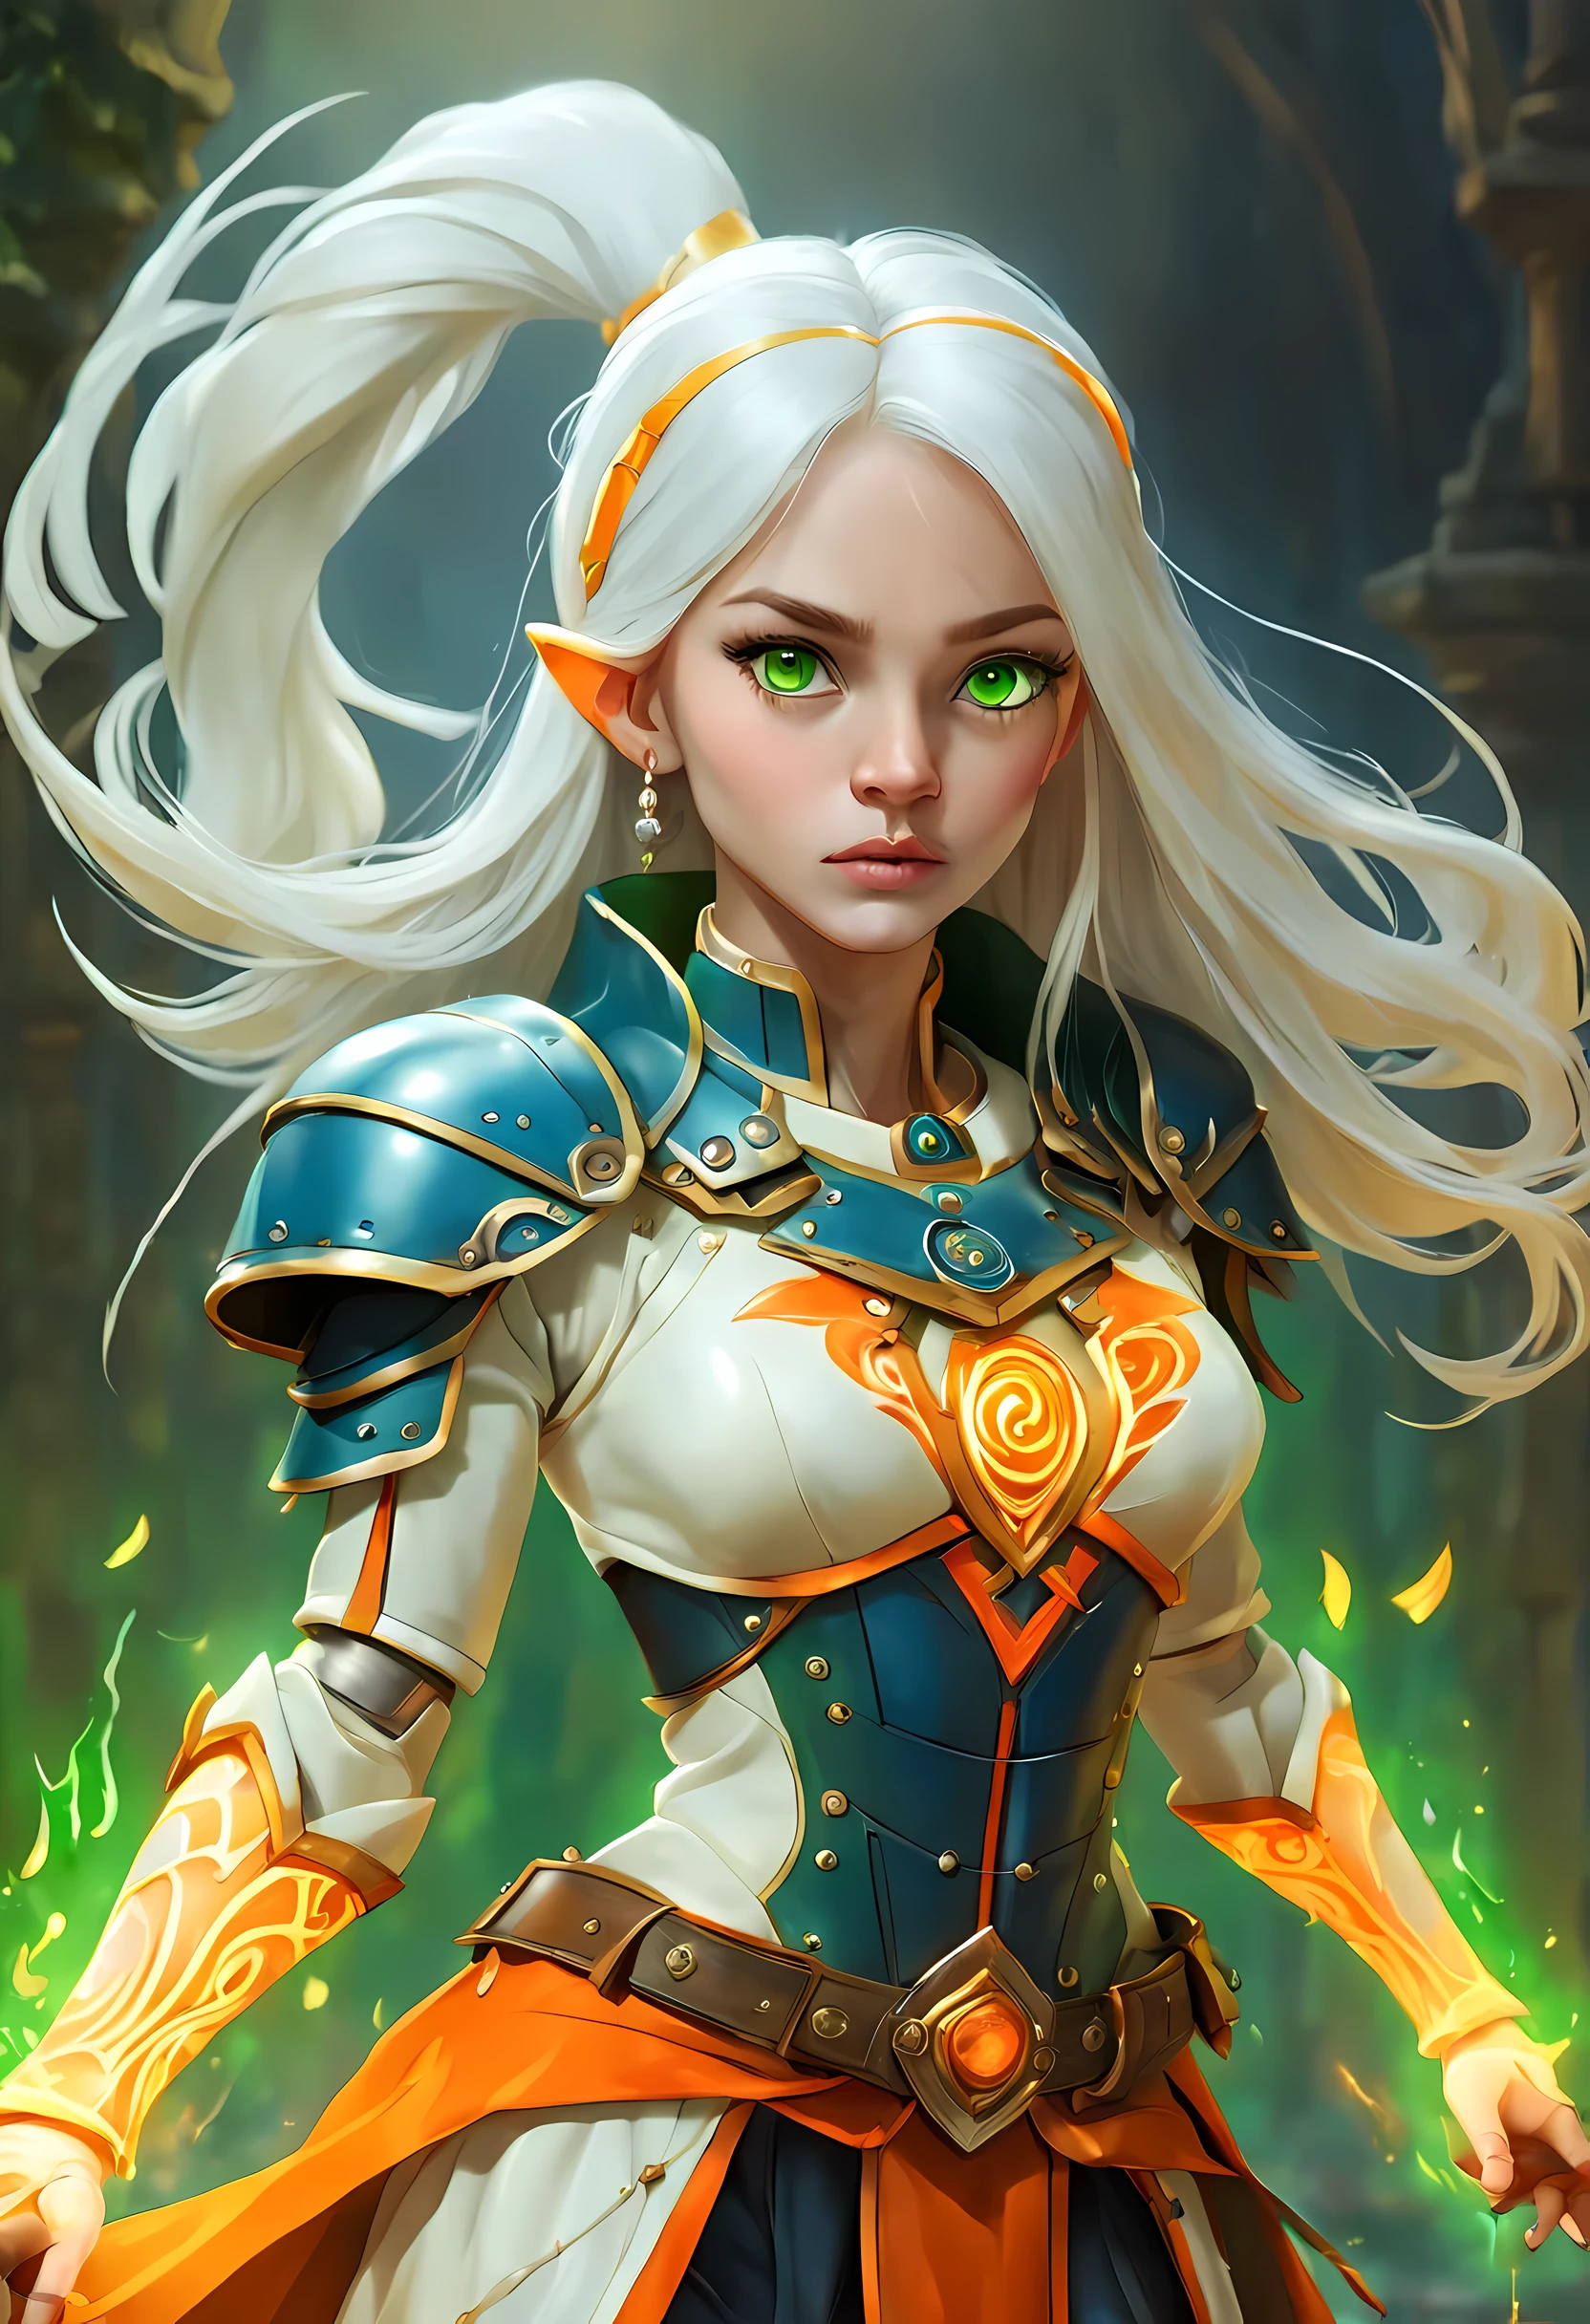 fantasy art, dnd art, RPG art, wide shot, (masterpiece: 1.4) a (portrait: 1.3) intense details, highly detailed, photorealistic, best quality, highres, GlowingRunesAI_yellow, portrait a female (fantasy art, Masterpiece, best quality: 1.3) bl3uprint (blue skin: 1.5, intense details facial details, exquisite beauty, (fantasy art, Masterpiece, best quality) cleric, (blue: 1.3) skinned female, (white hair: 1.3), long hair, intense (green: 1.3) eye, fantasy art, Masterpiece, best quality) armed a fiery sword red fire, wearing heavy (white: 1.3) half plate mail armor, wearing high heeled laced boots, wearing an(orange :1.3) cloak, wearing glowing holy symbol GlowingRunes_yellow, within fantasy temple background, reflection light, high details, best quality, 16k, [ultra detailed], masterpiece, best quality, (extremely detailed), close up, ultra wide shot, photorealistic, RAW, fantasy art, dnd art, fantasy art, realistic art,((best quality)), ((masterpiece)), (detailed), perfect face, ((no ears: 1.6))